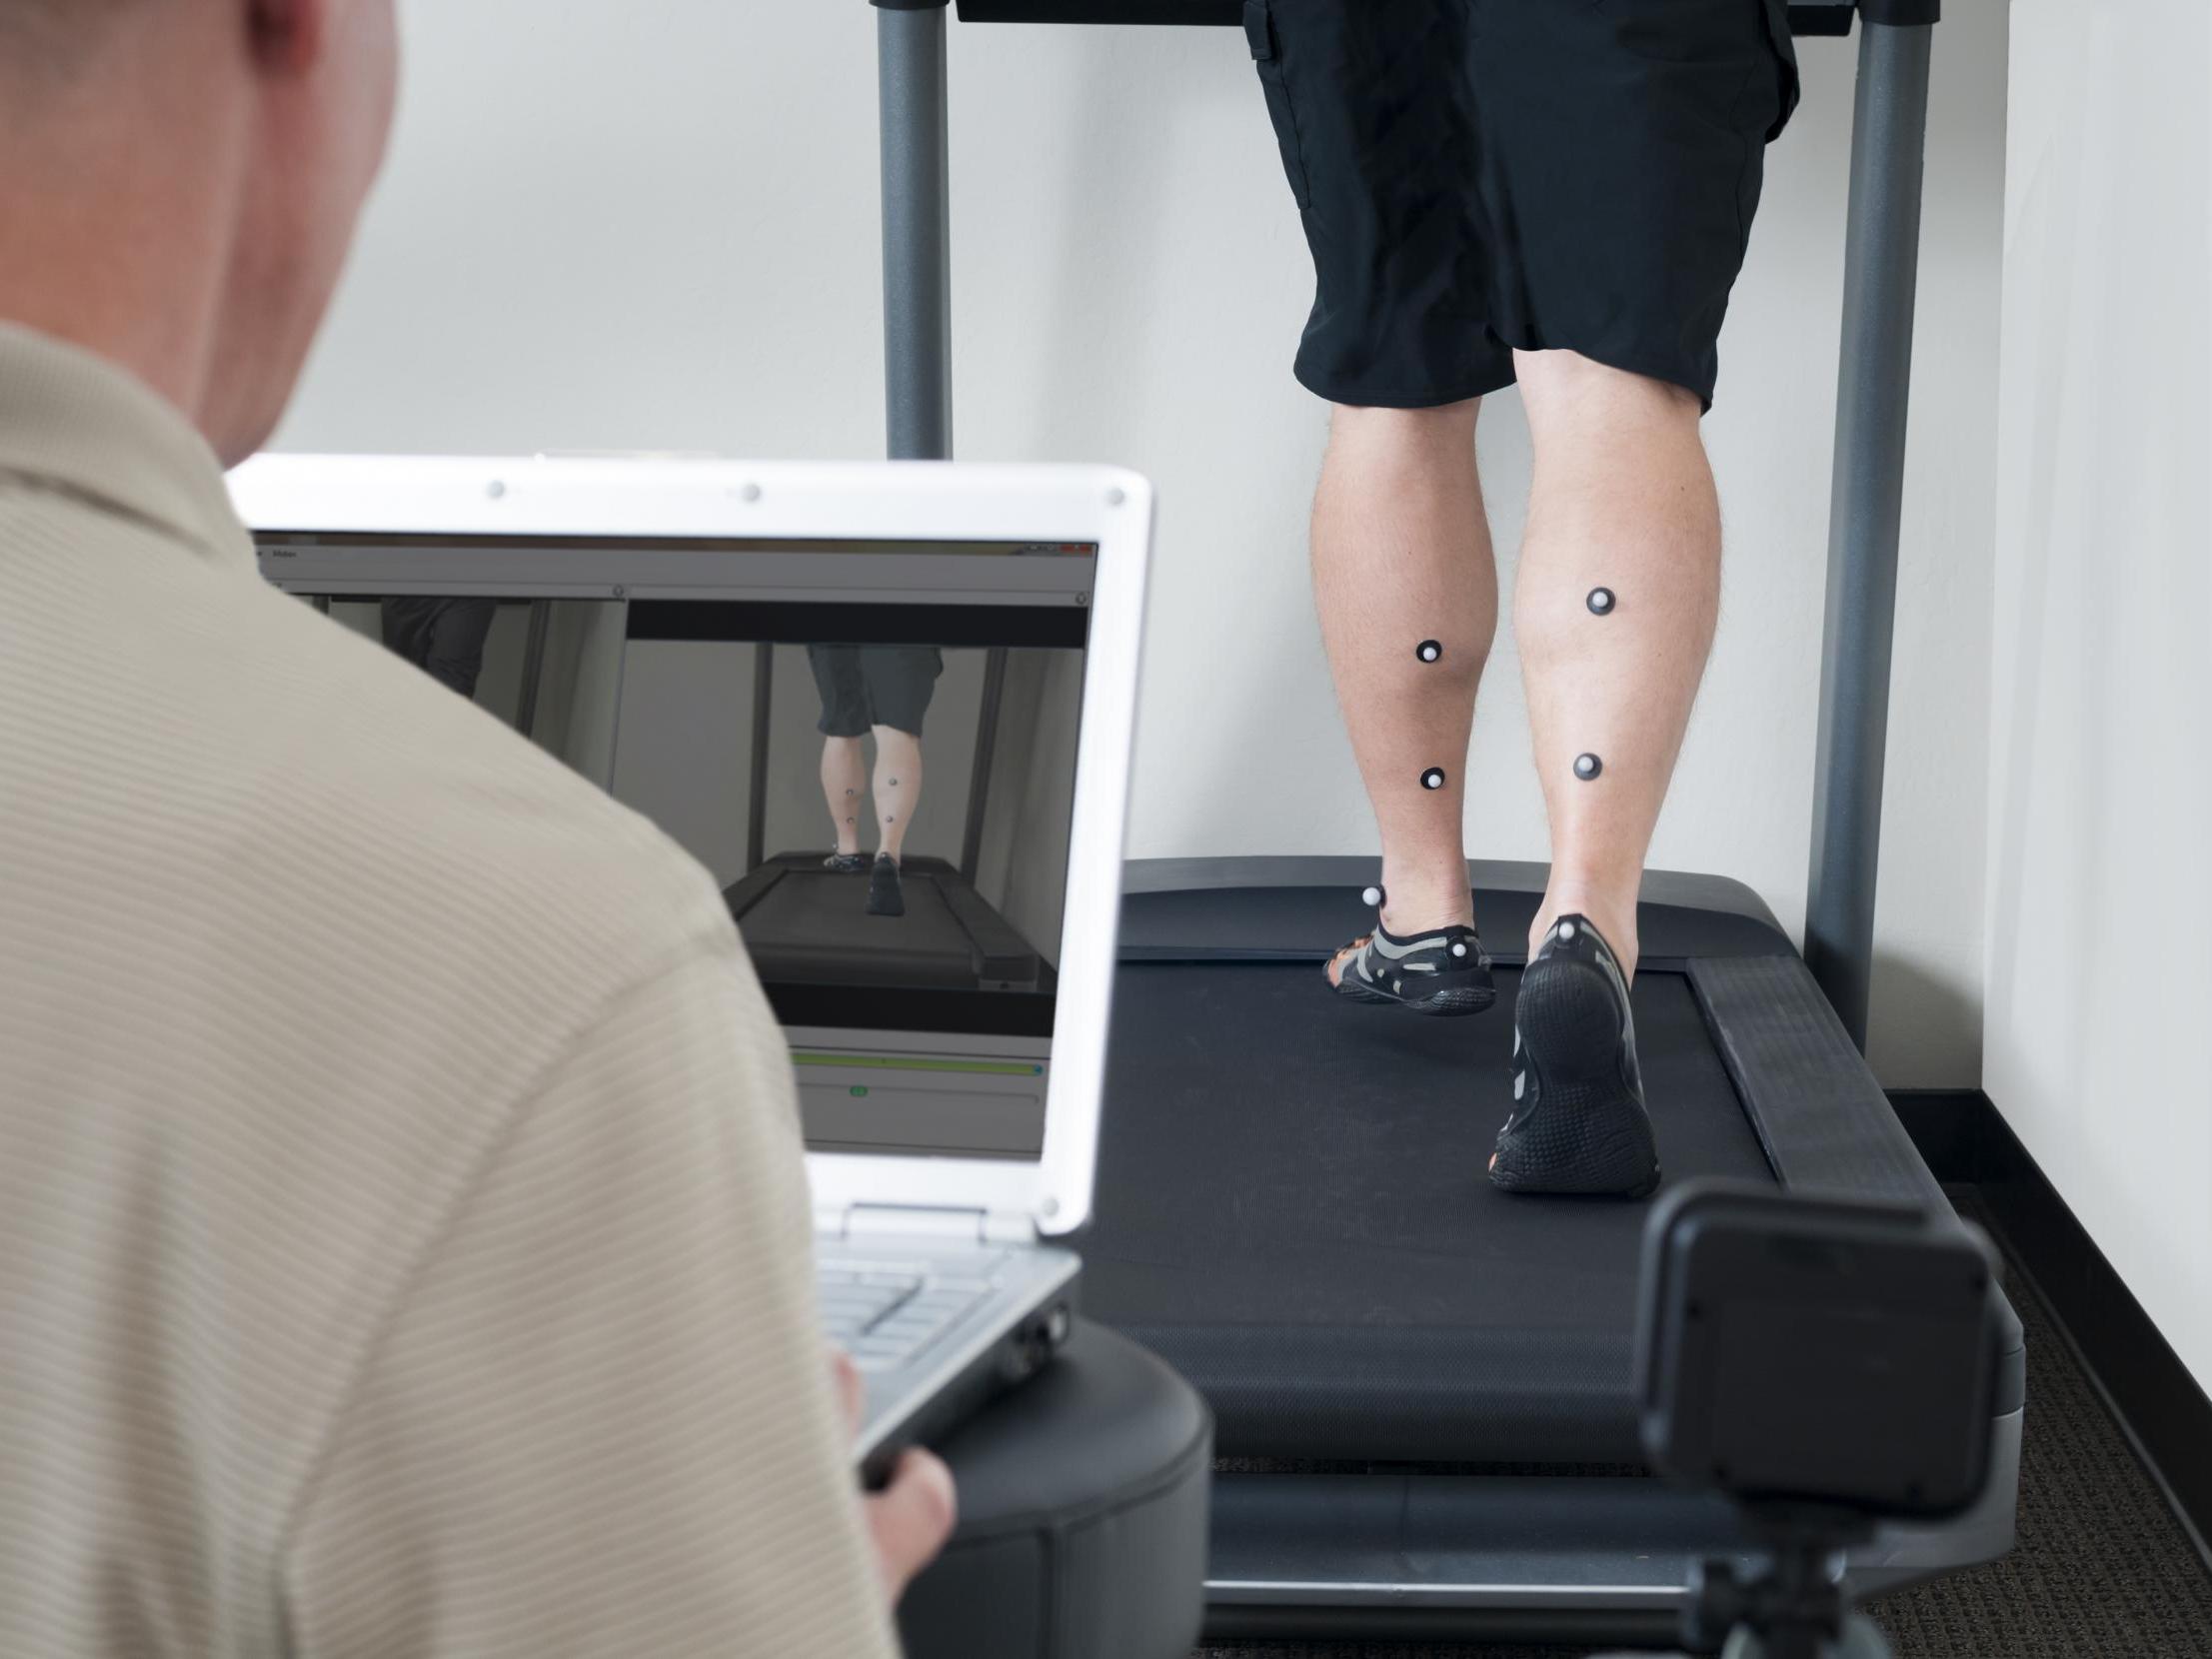 Stock image of gait analysis performed on treadmill.